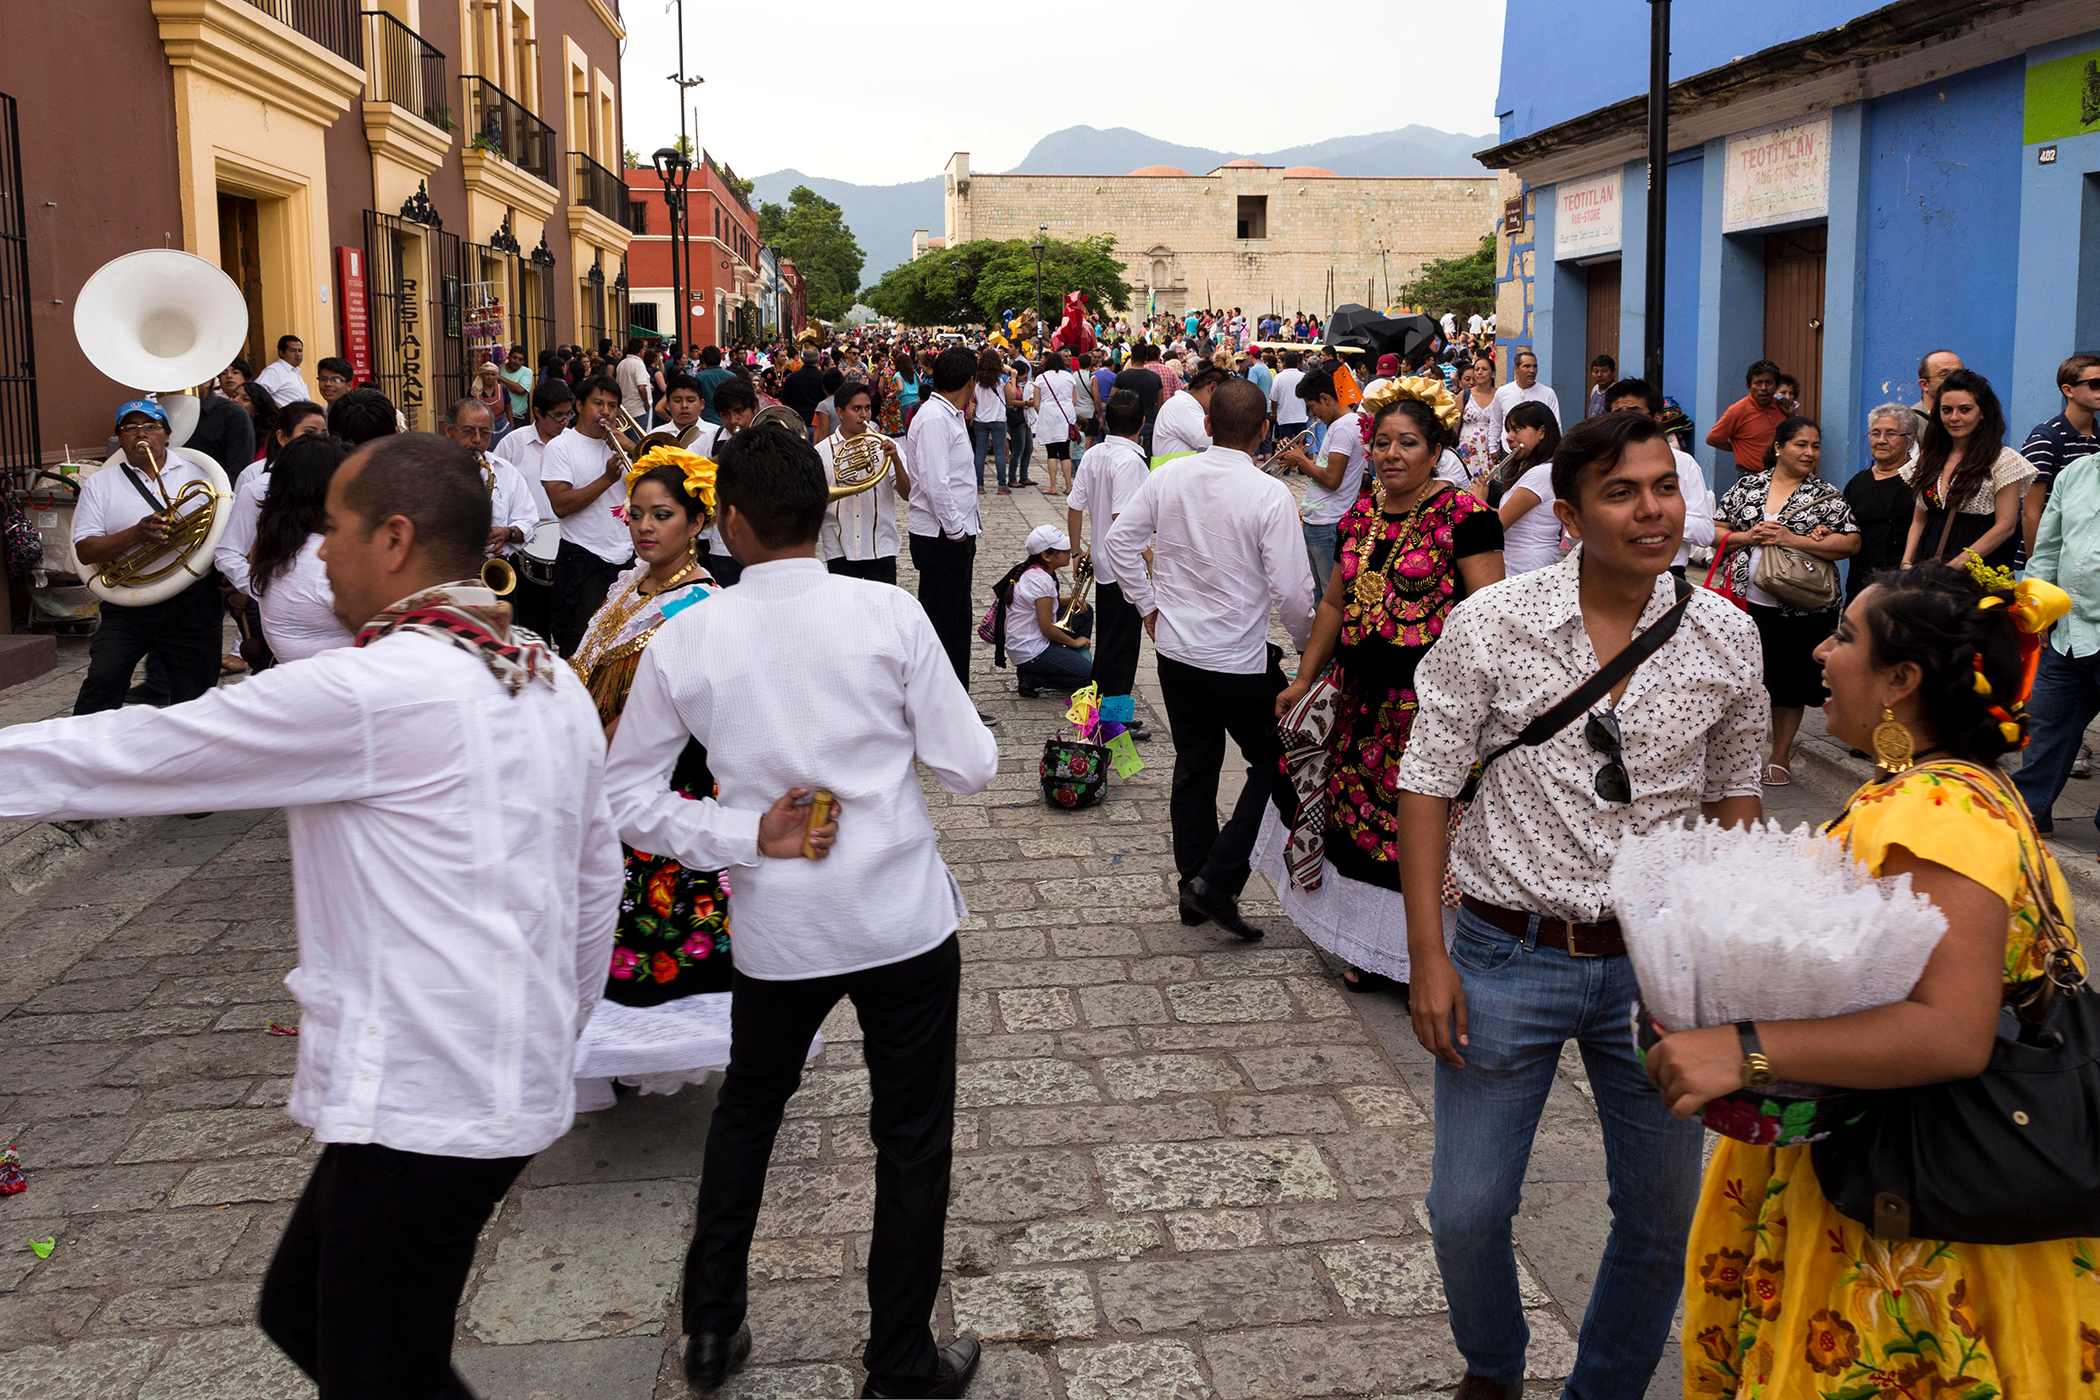 People playing and dancing in Oaxaca's Zocalo, Mexico